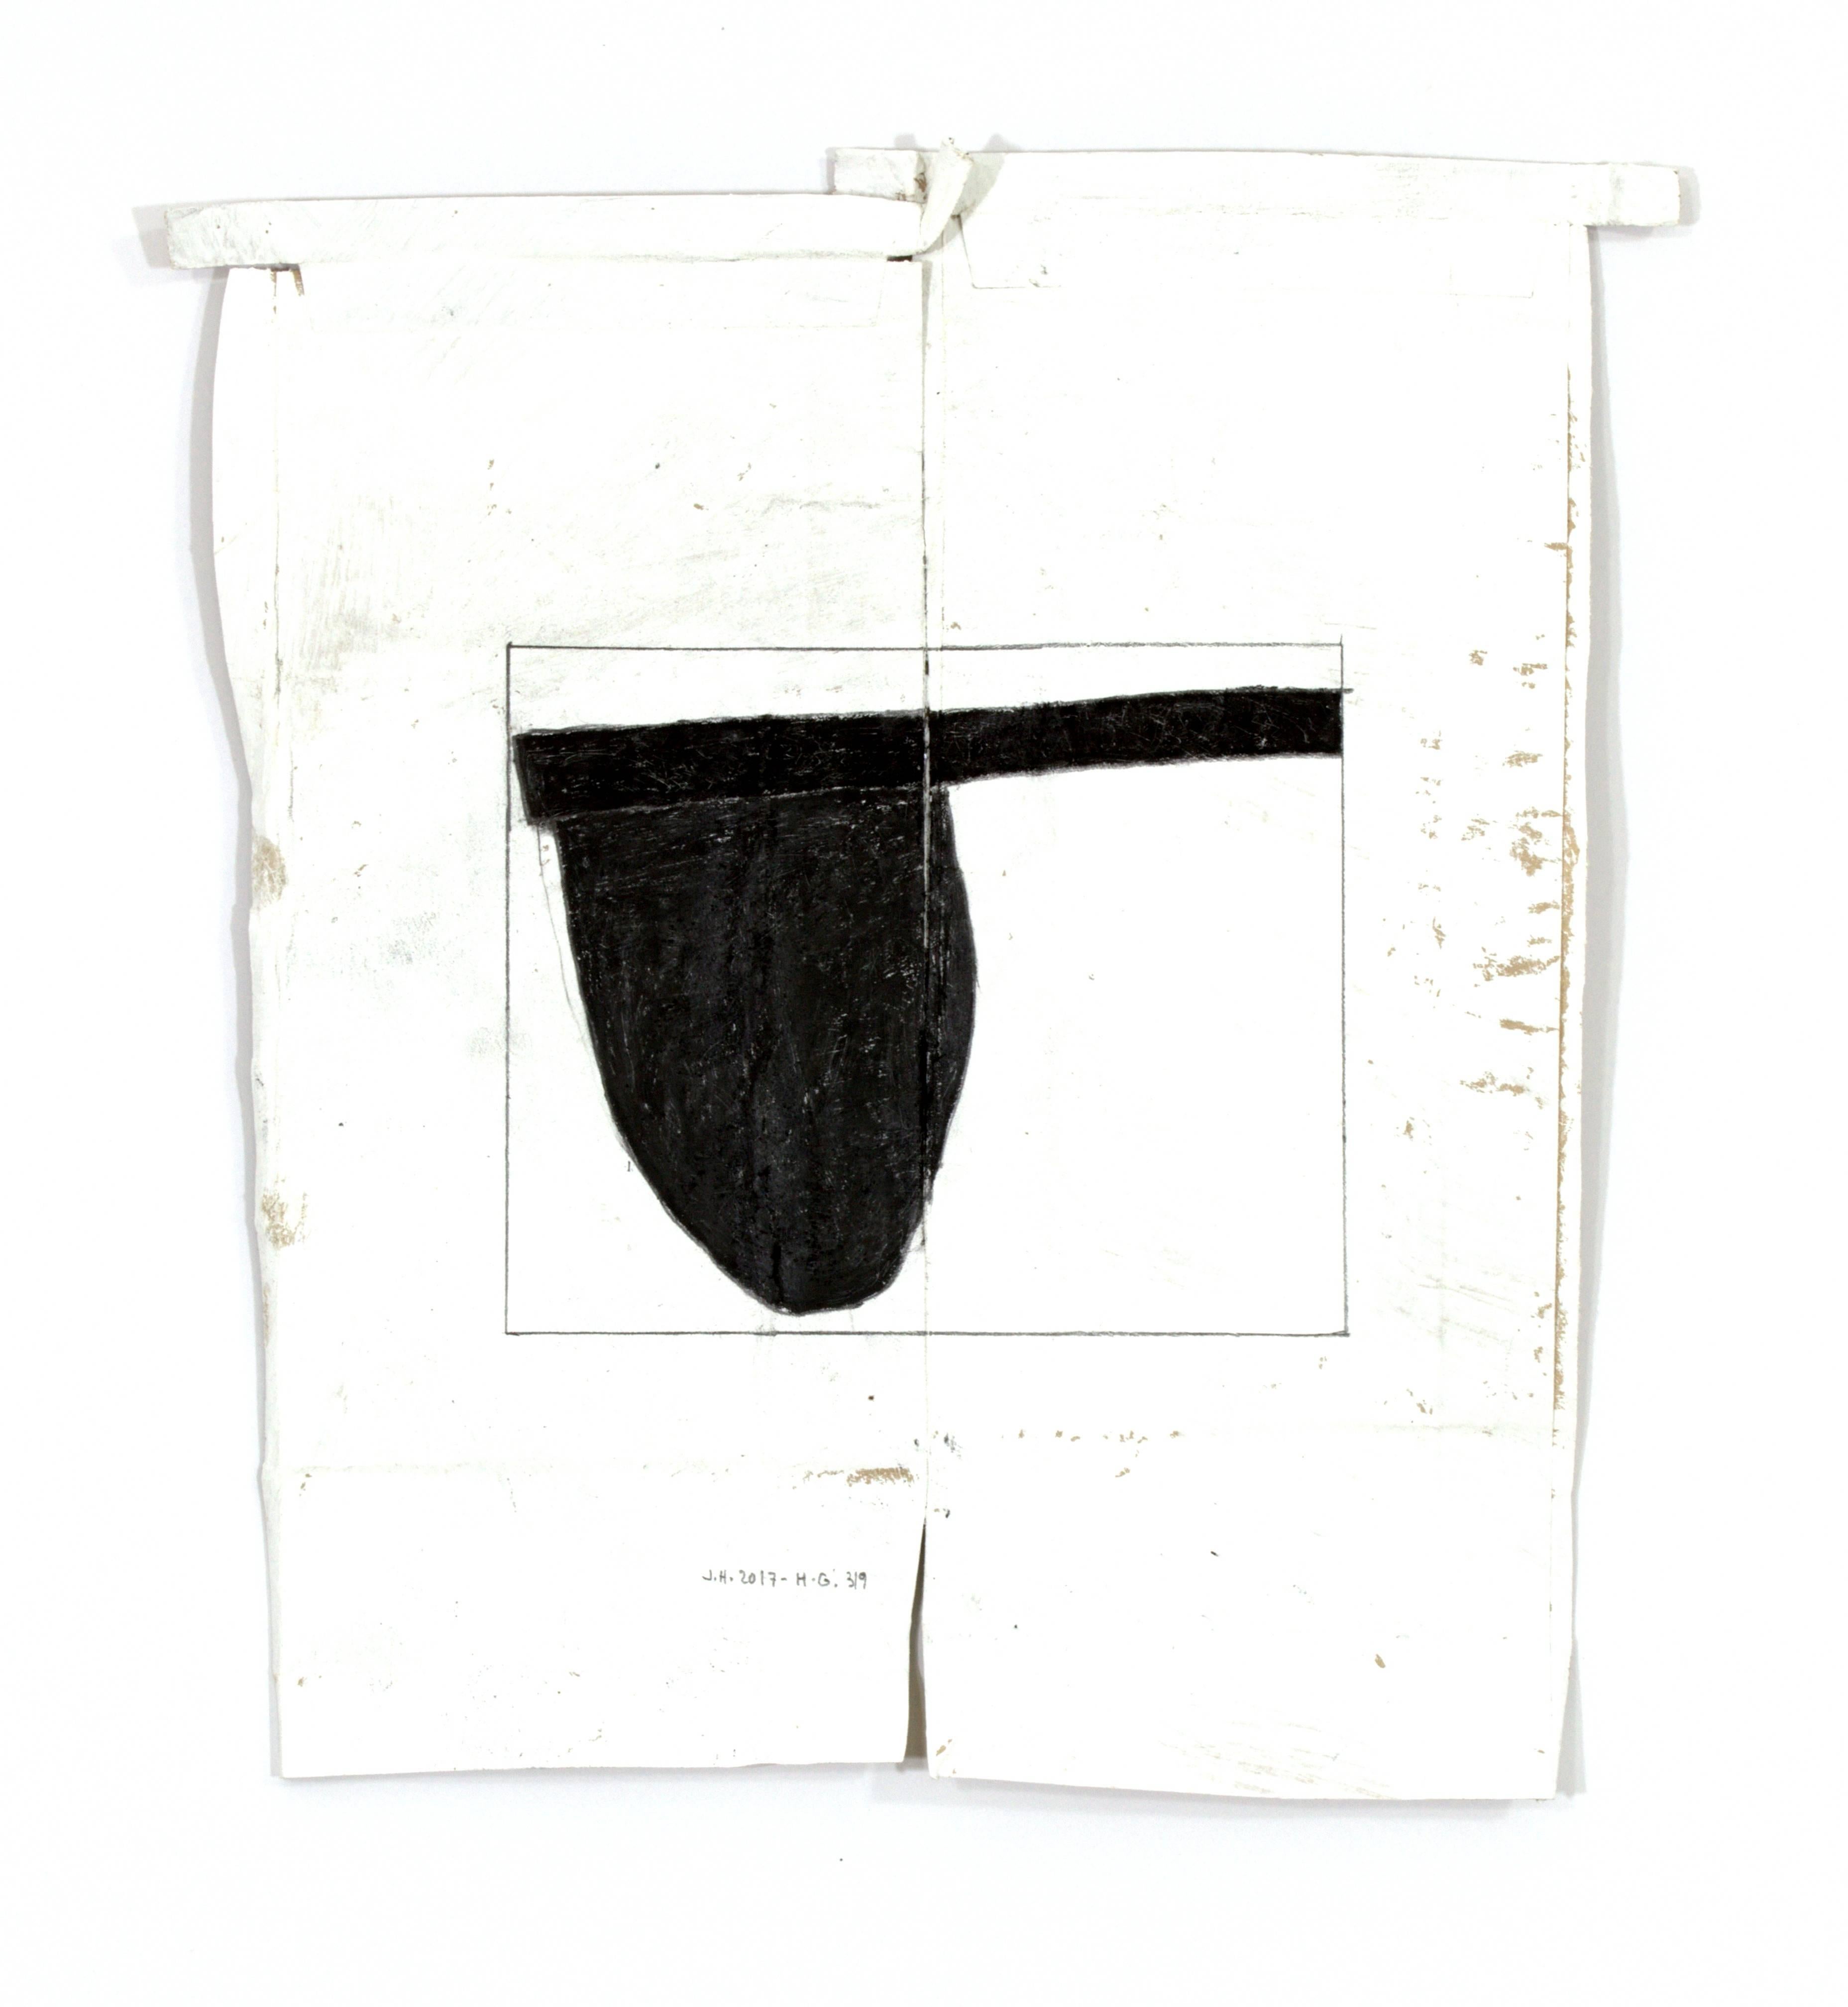 Jesse Hickman works intuitively, making abstract, painted sculptural objects and works on paper. Most of his current works are small scale and hang from the wall. This newest series Higher Grounds are charcoal and graphite drawings created from used